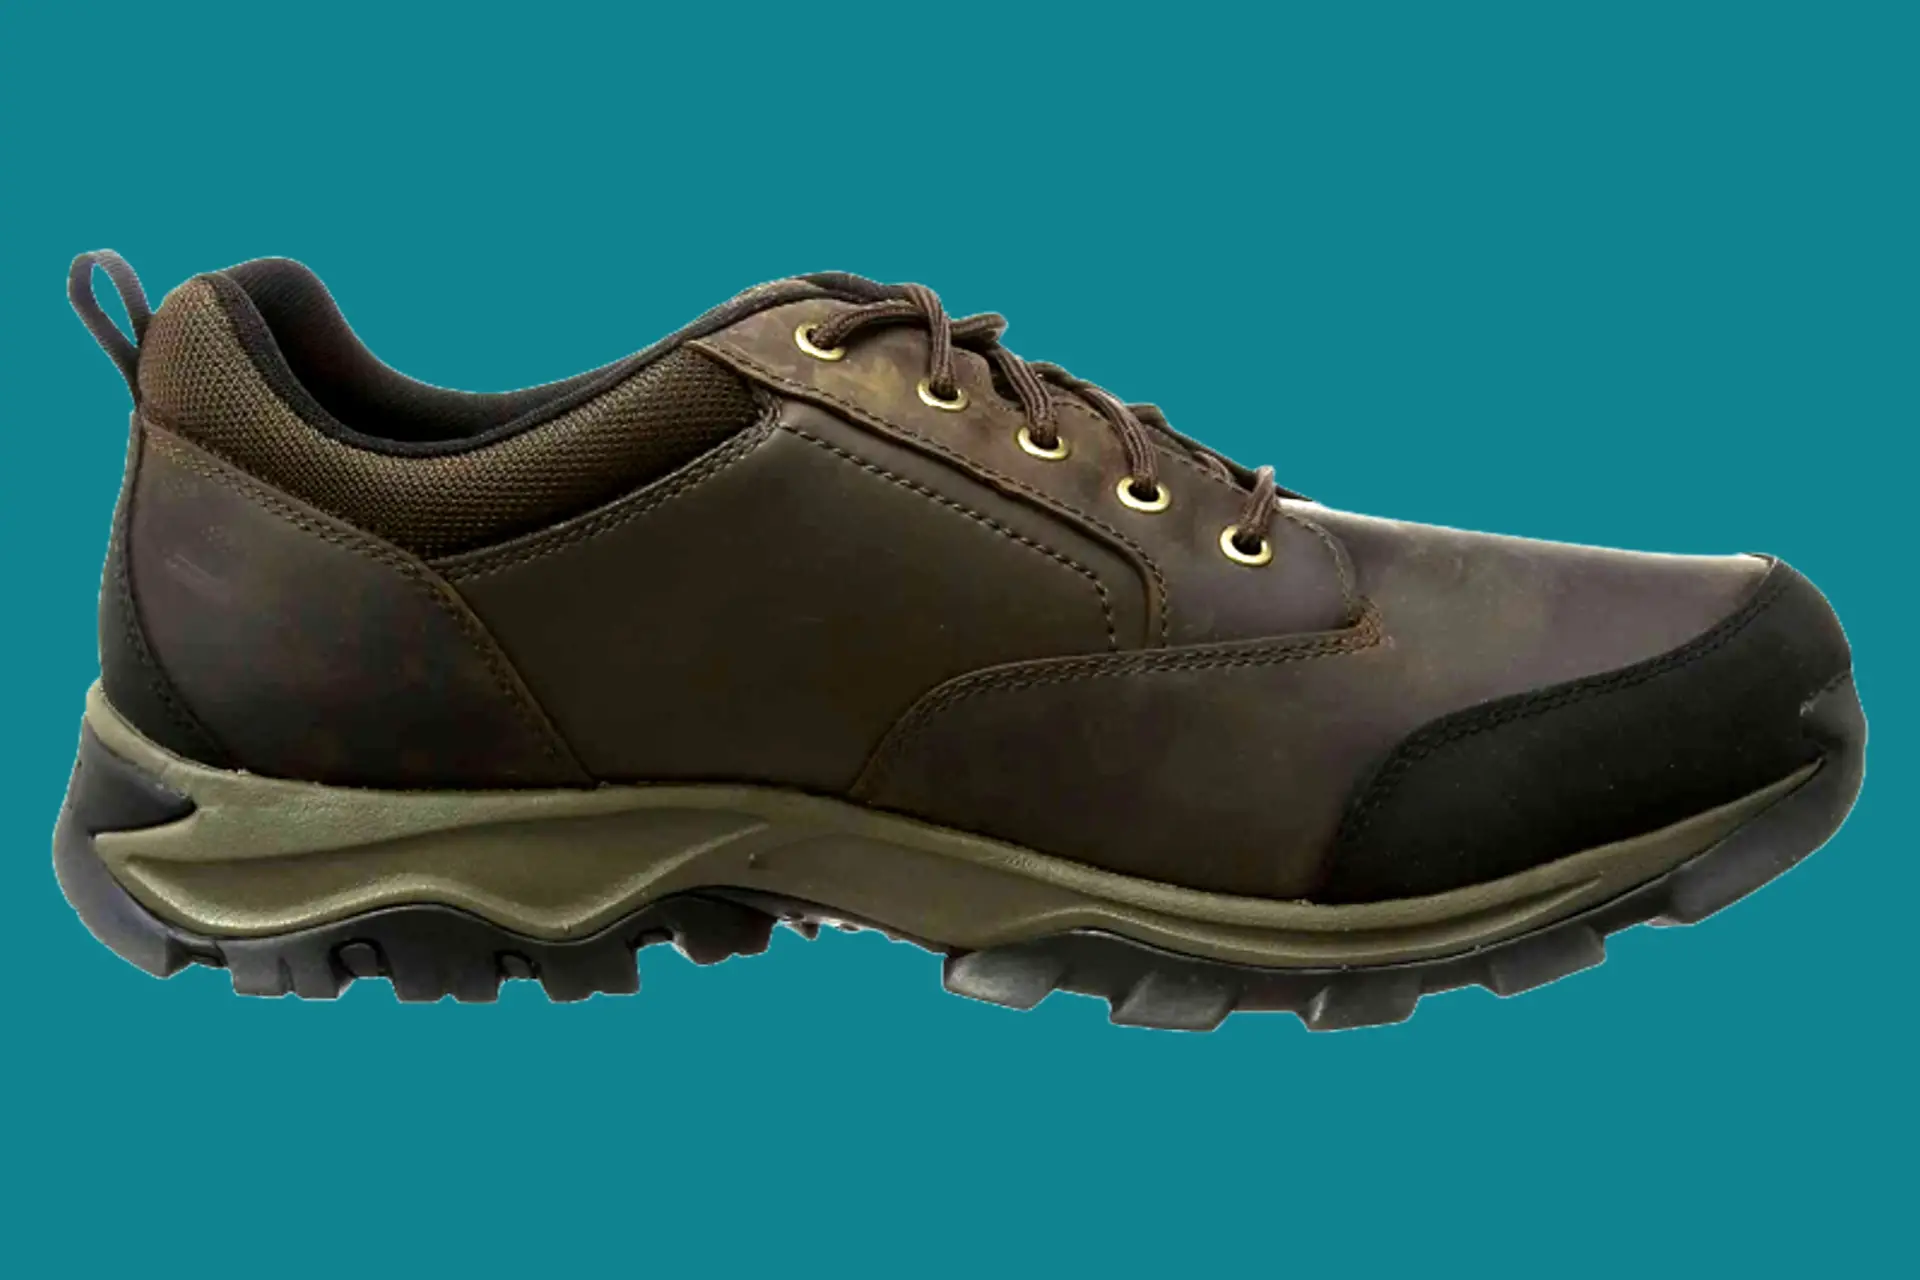 Comfortable hiking shoe by Timberland